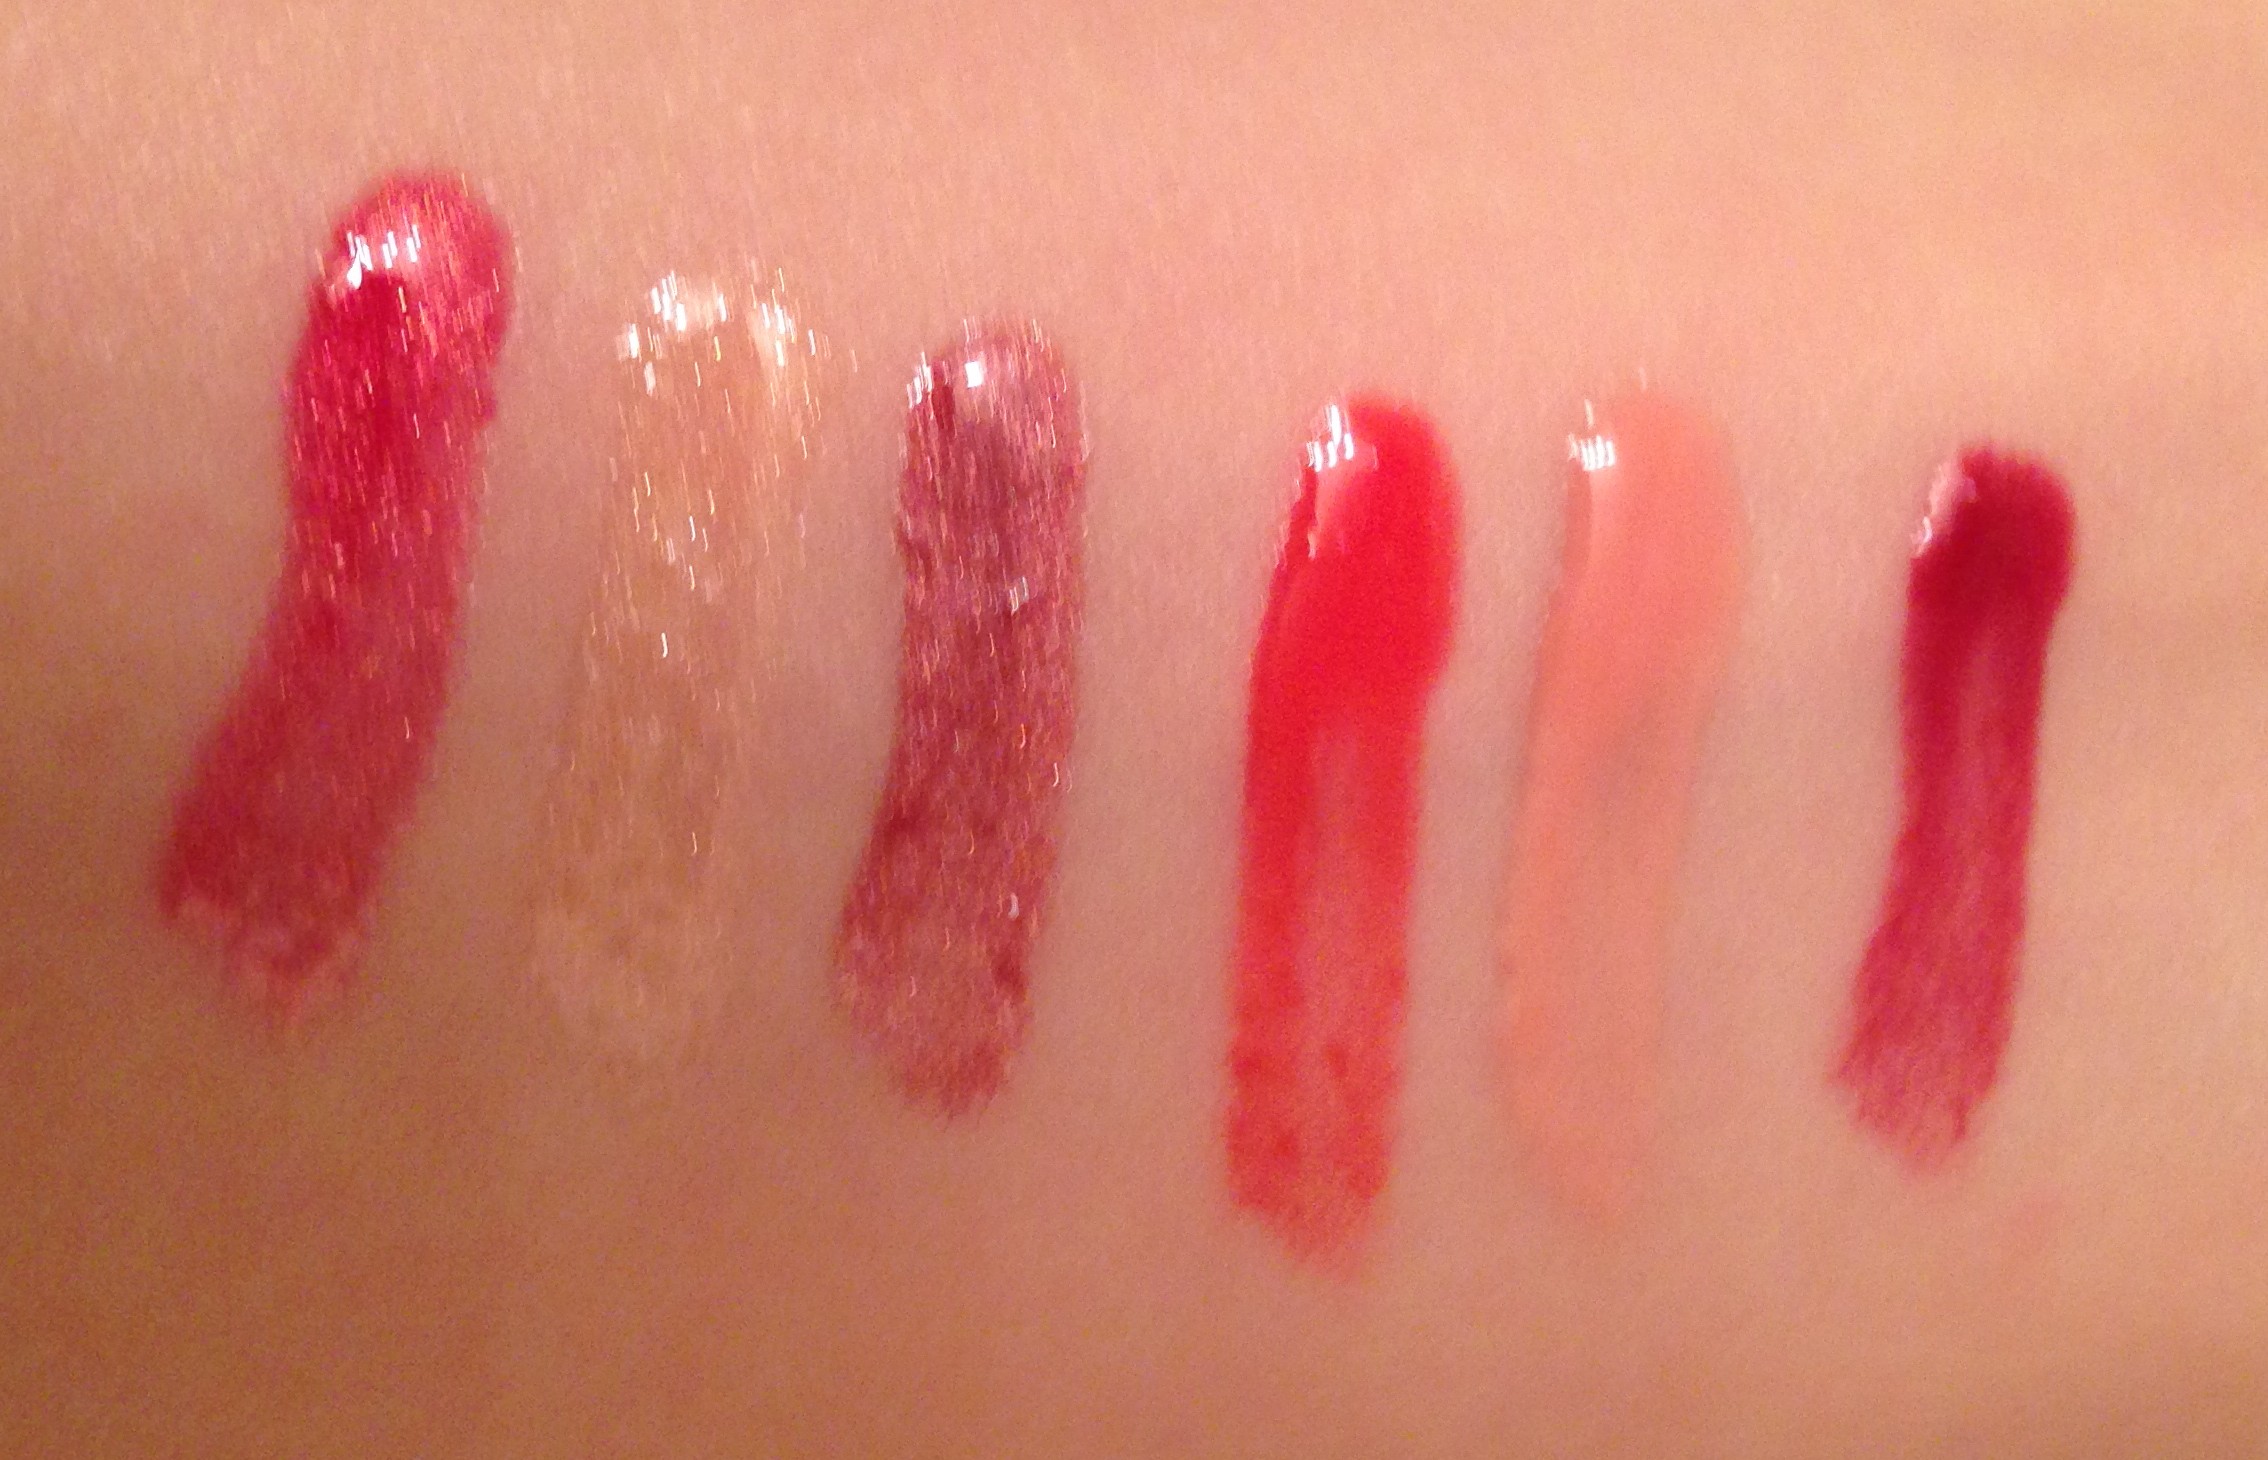 from left to right - Tiffany, Amy, Gabby, Cherry Flip, White Russian, Kir R...